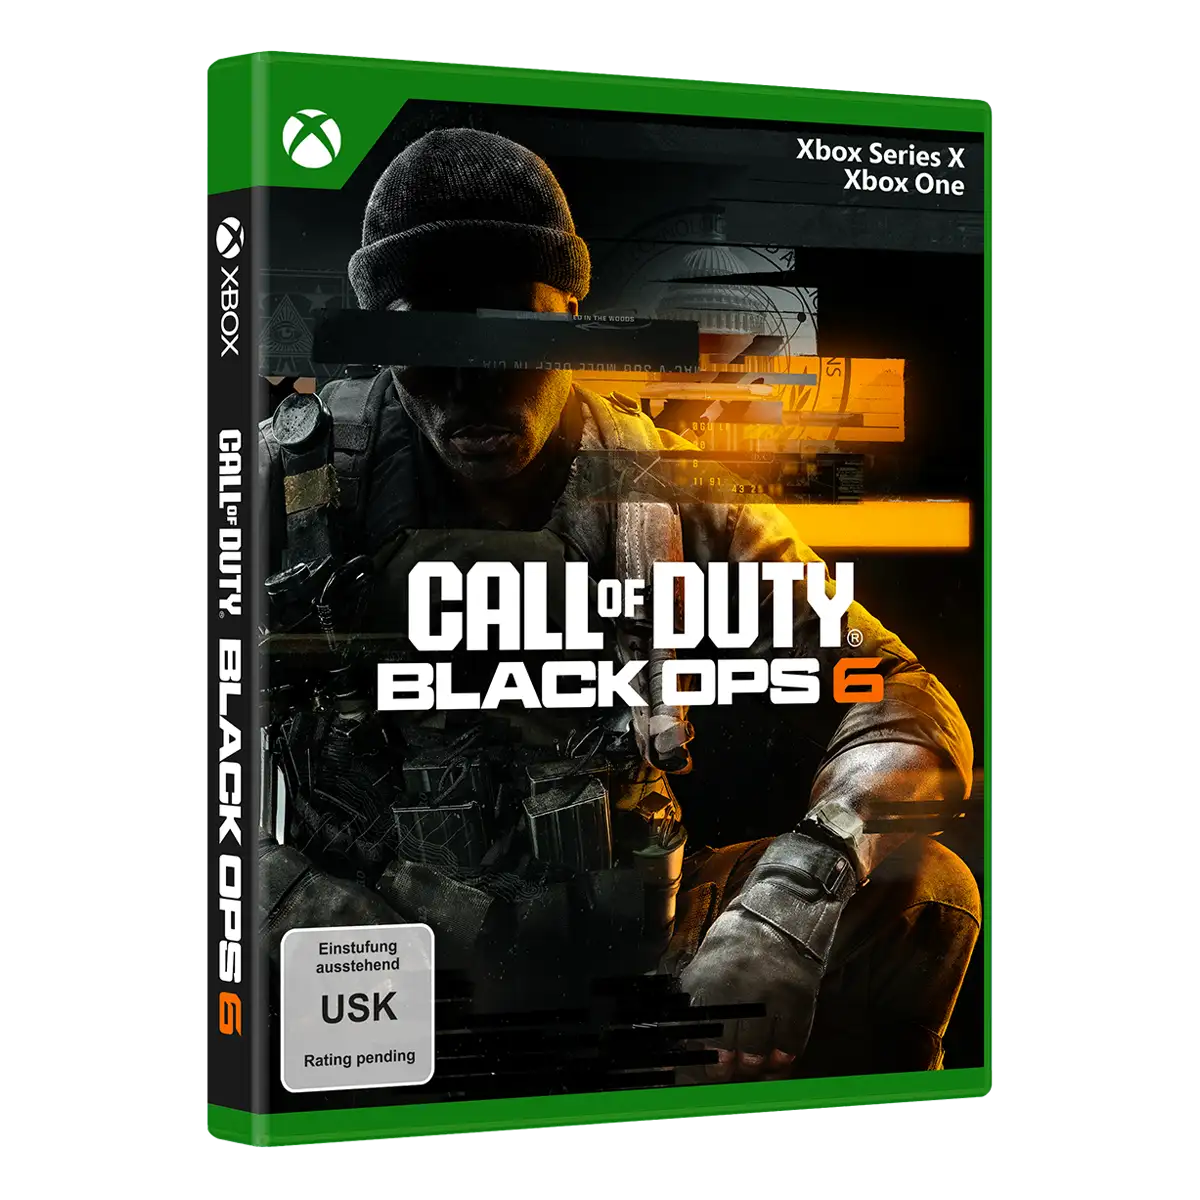 Call of Duty: Black Ops 6 (Xbox One / Xbox Series X) Image 2